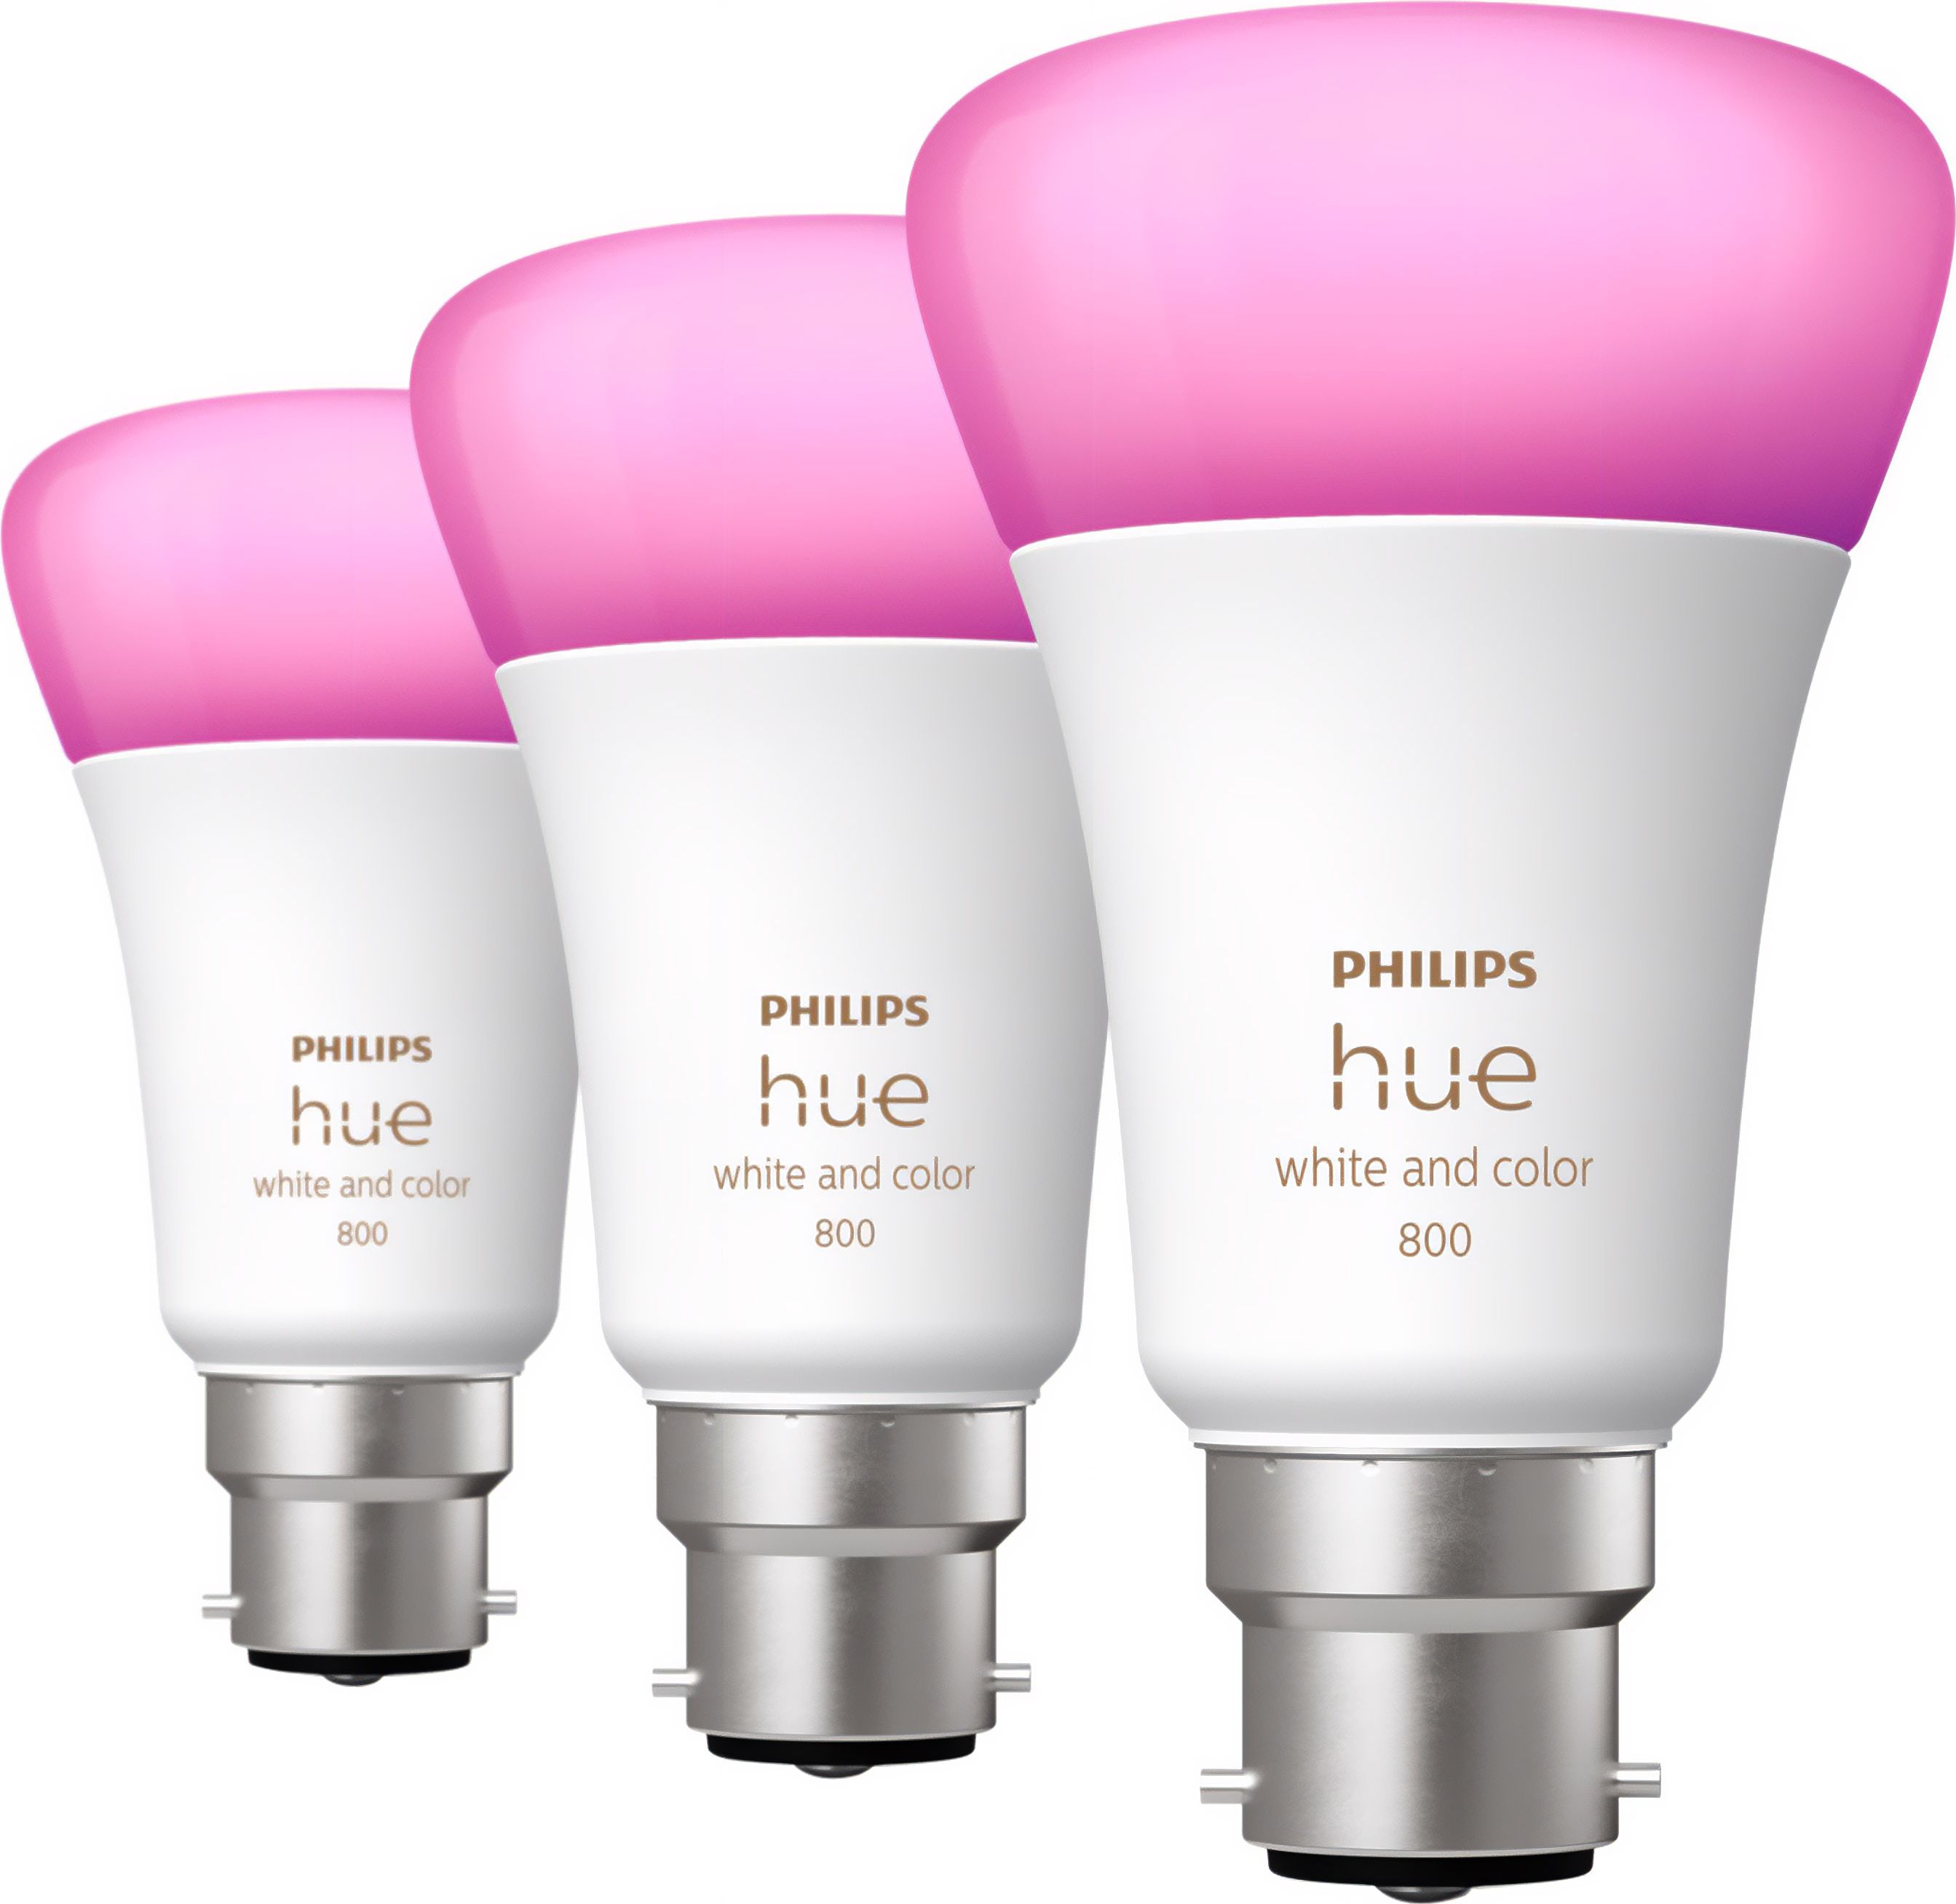 Philips Hue White and Colour Ambiance B22 Smart Bulb - 3 Pack - White, White